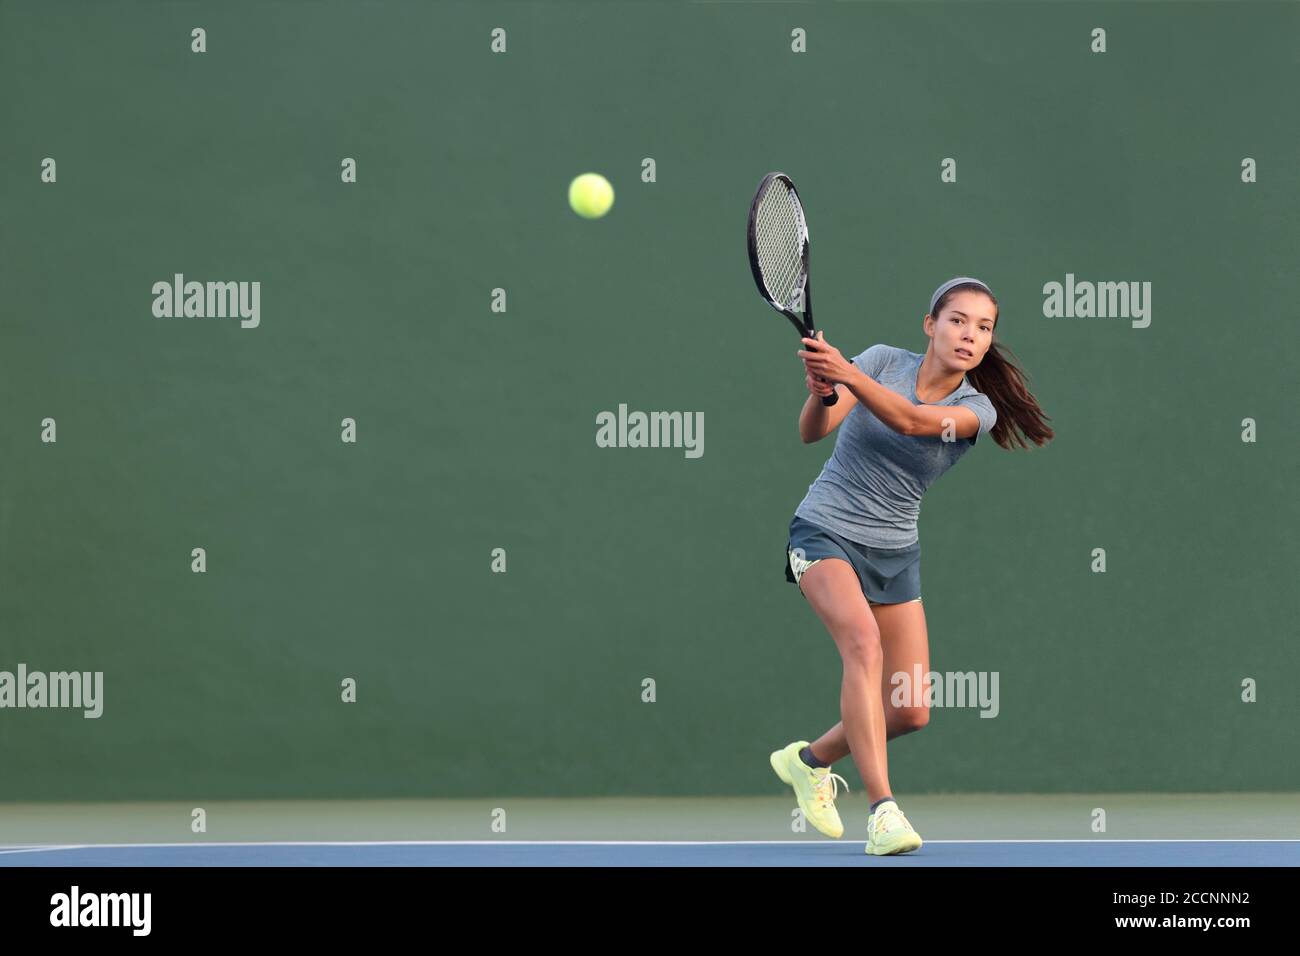 Tennis playing woman hitting ball on green hard court. Asian athlete girl returning serve with racket wearing skort and shoes Stock Photo